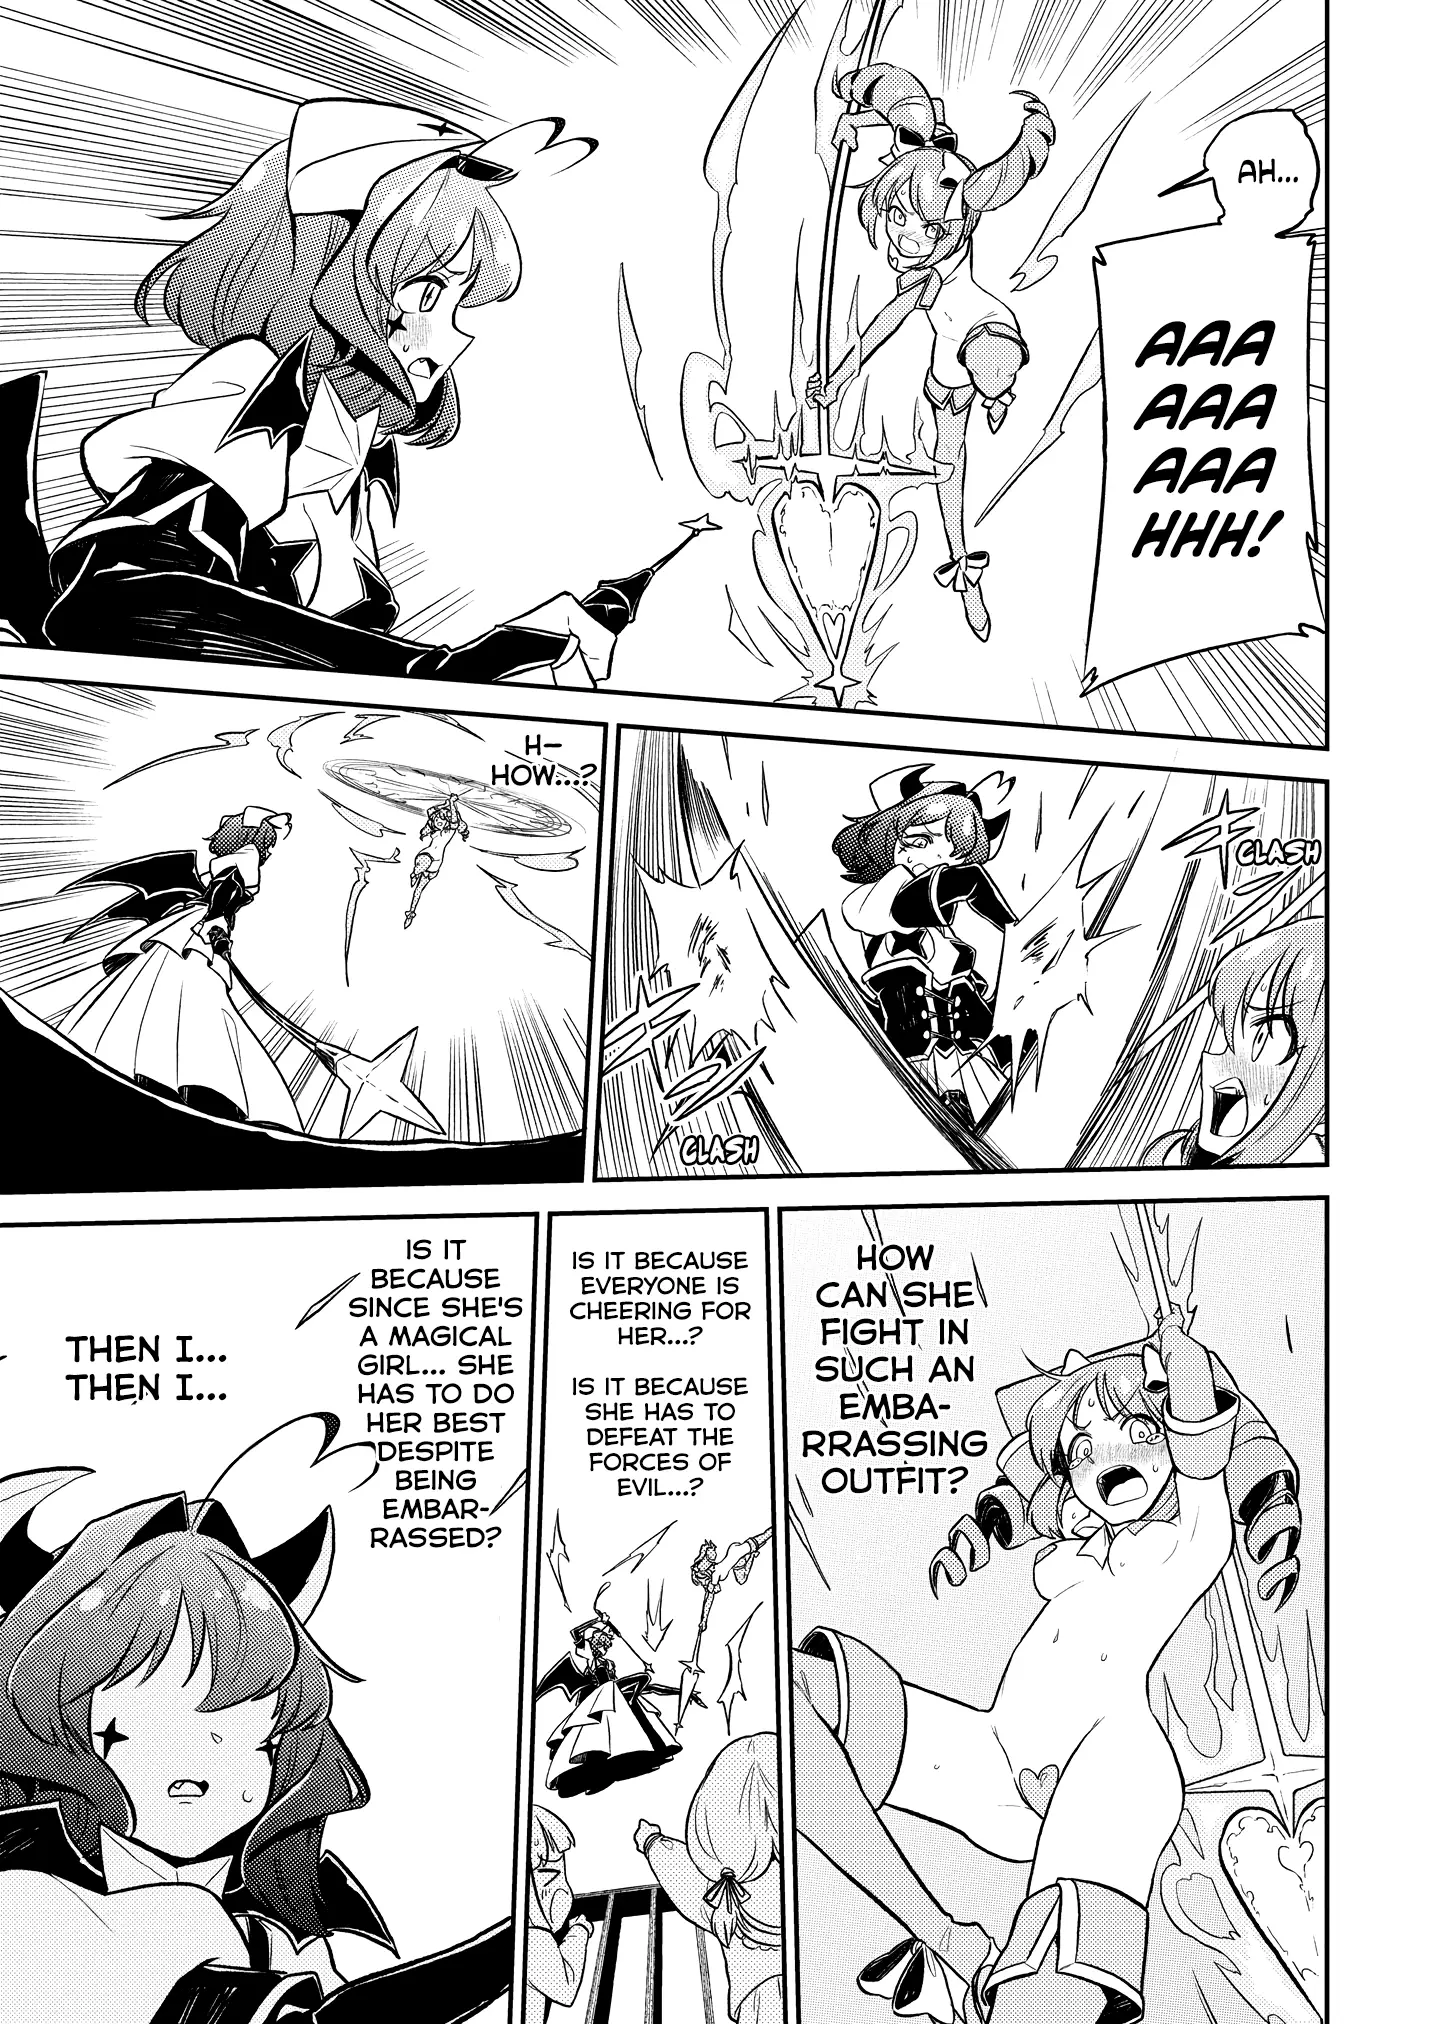 Looking Up To Magical Girls - 6 page 18